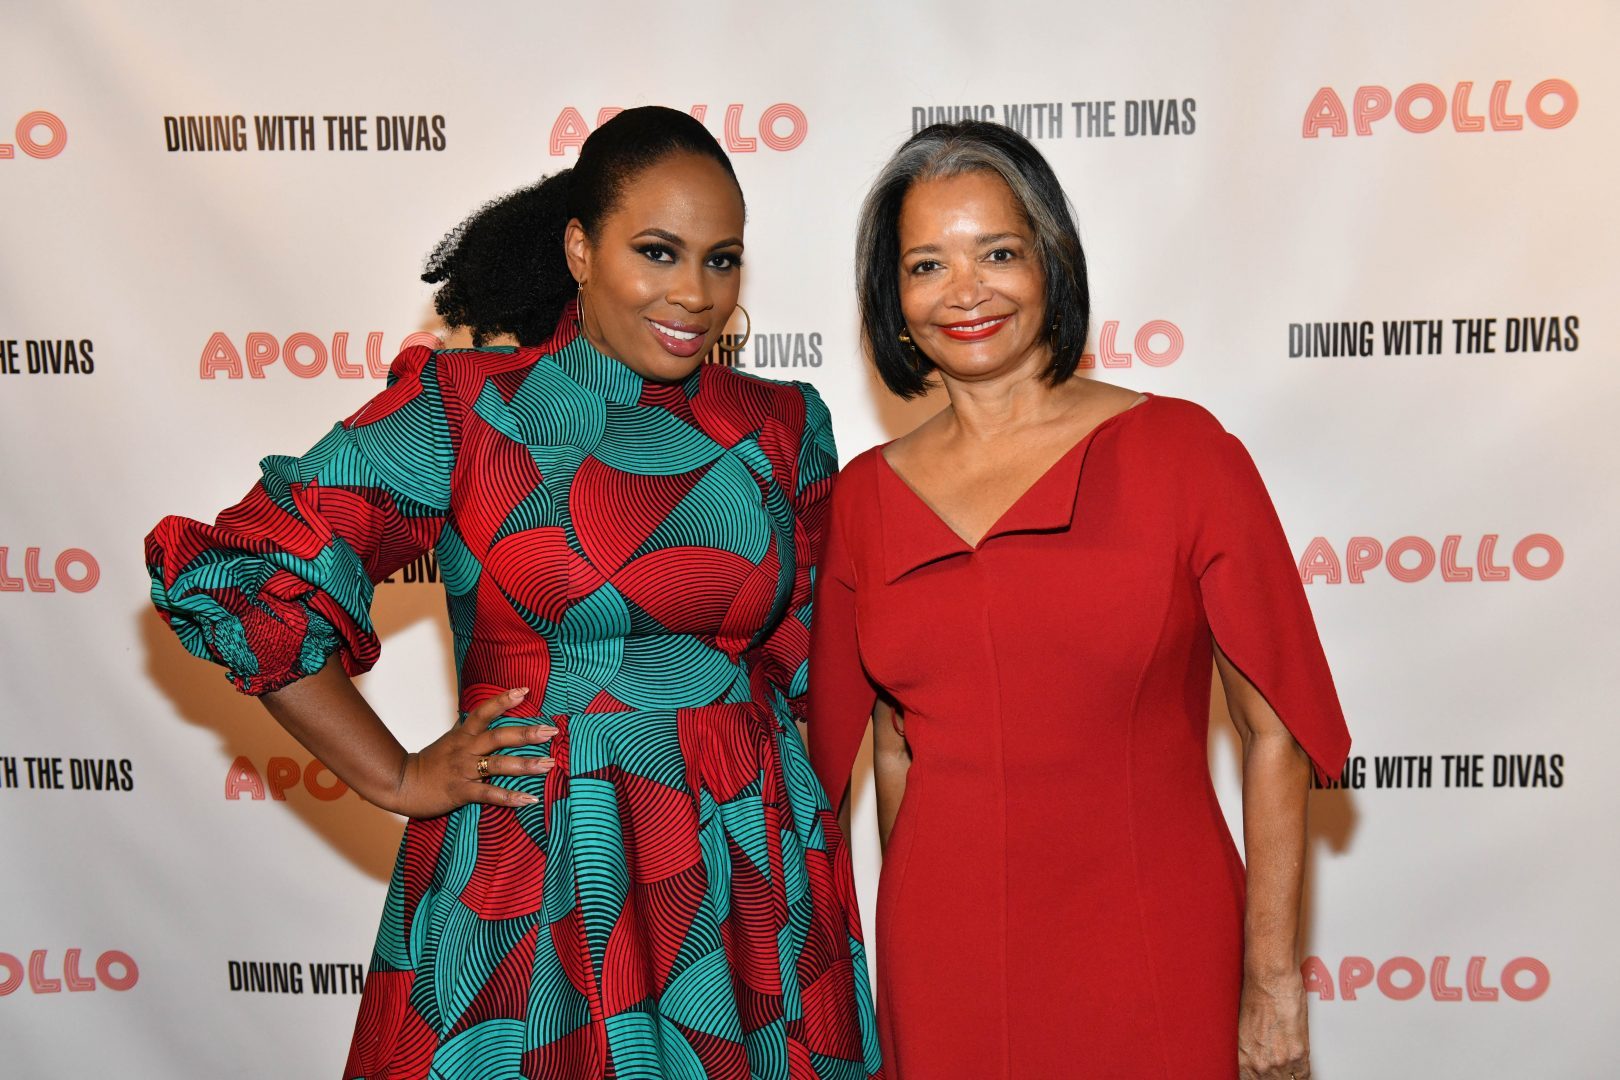 Jonelle Procope and Kamilah Forbes posing next to each other at an Apollo fundraiser